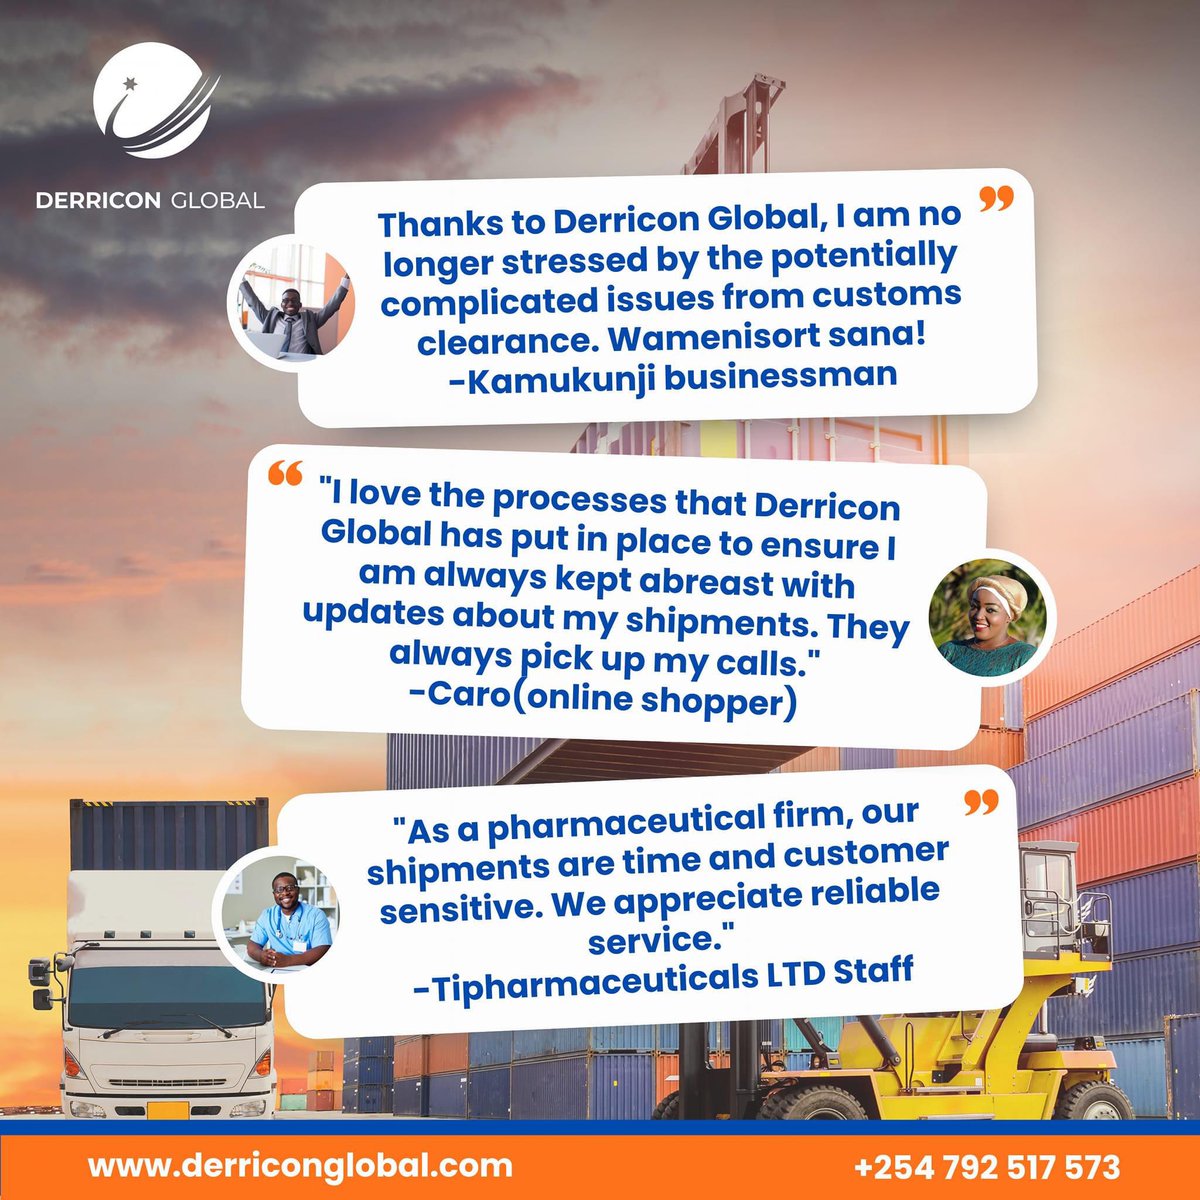 Your feedback keeps us going! Thank you! #clientappreciation #clientfeedback #LogisticsManagement #courierservices #internationalshippingavailable